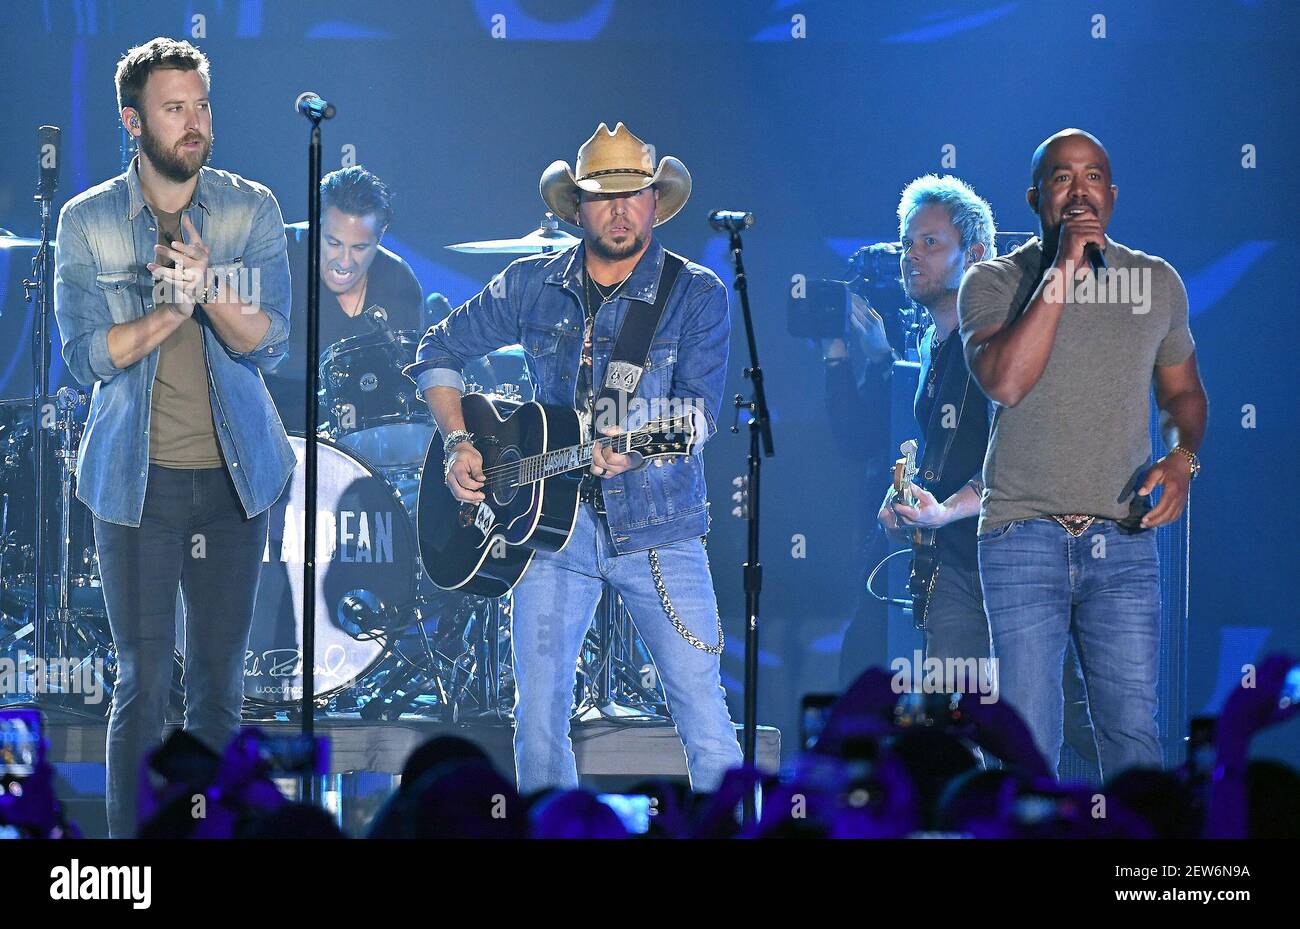 01 October 2017 - Las Vegas, Nevada - Singer Jason Aldean was performing on  stage during day three of the sold-out Route 91 Harvest Country Music  Festival when shots rang out. Las